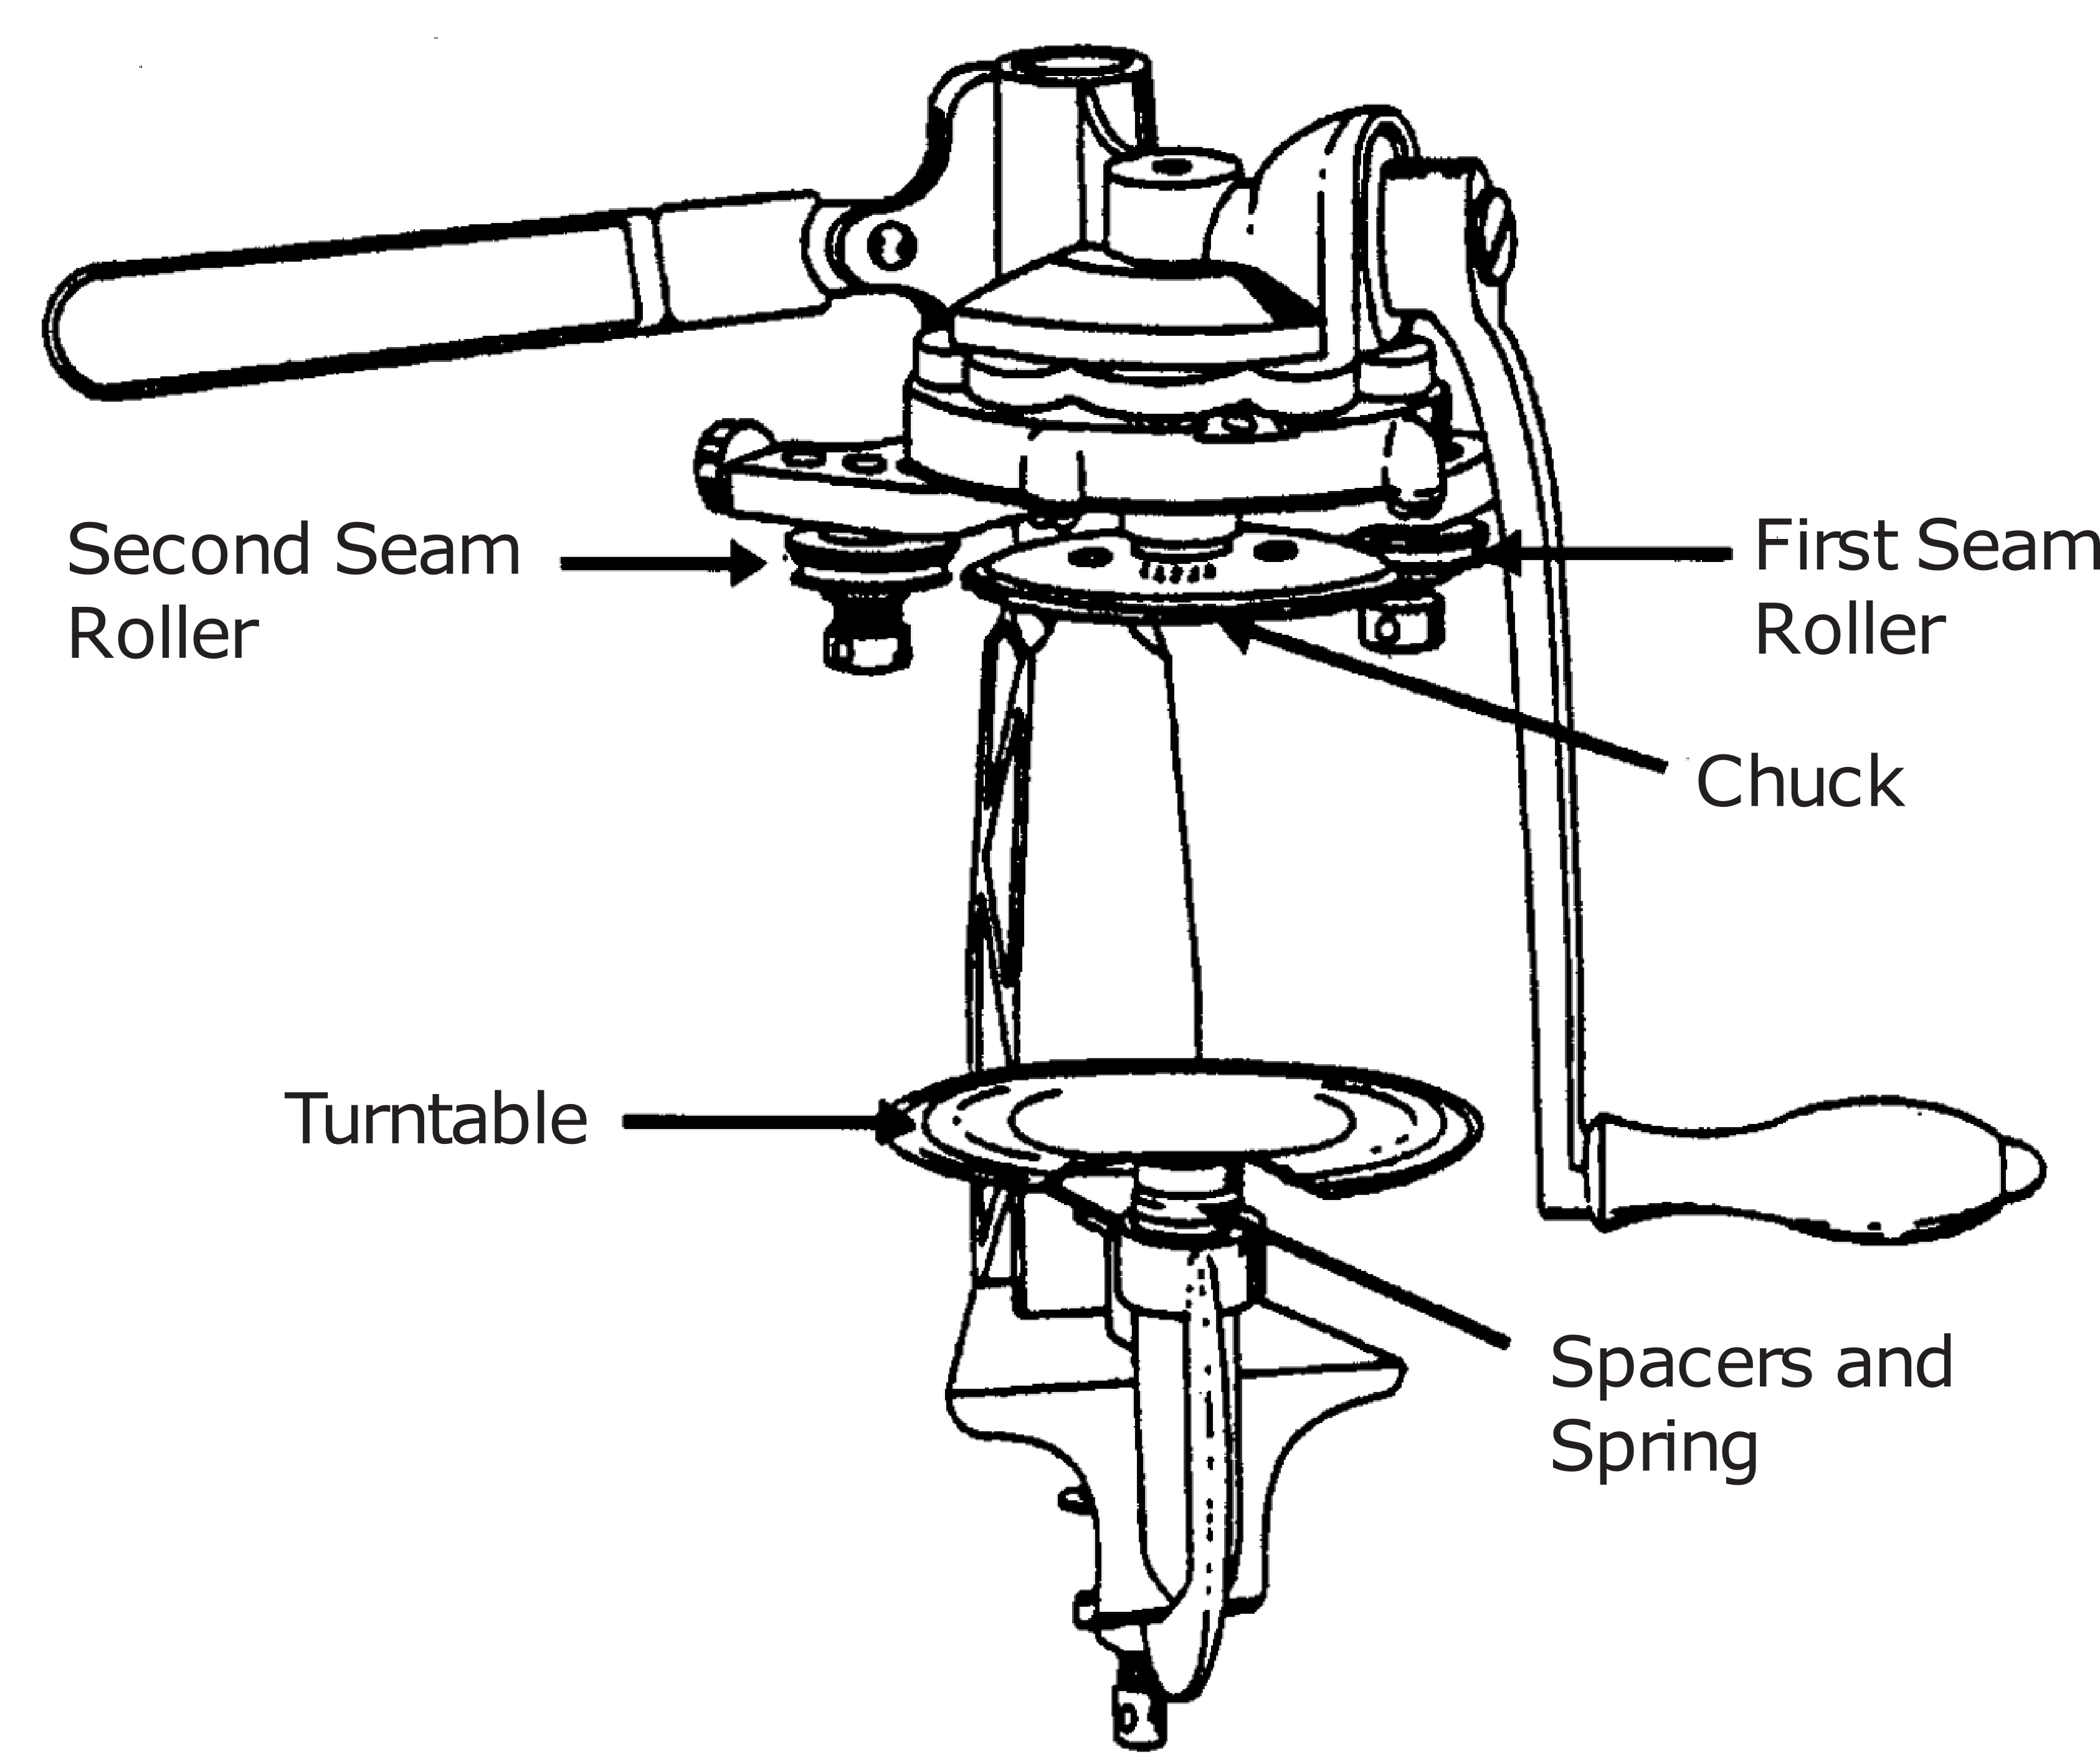 Seam rollers labeled second seam roller, first seam roller, turntable, and spacers and spring